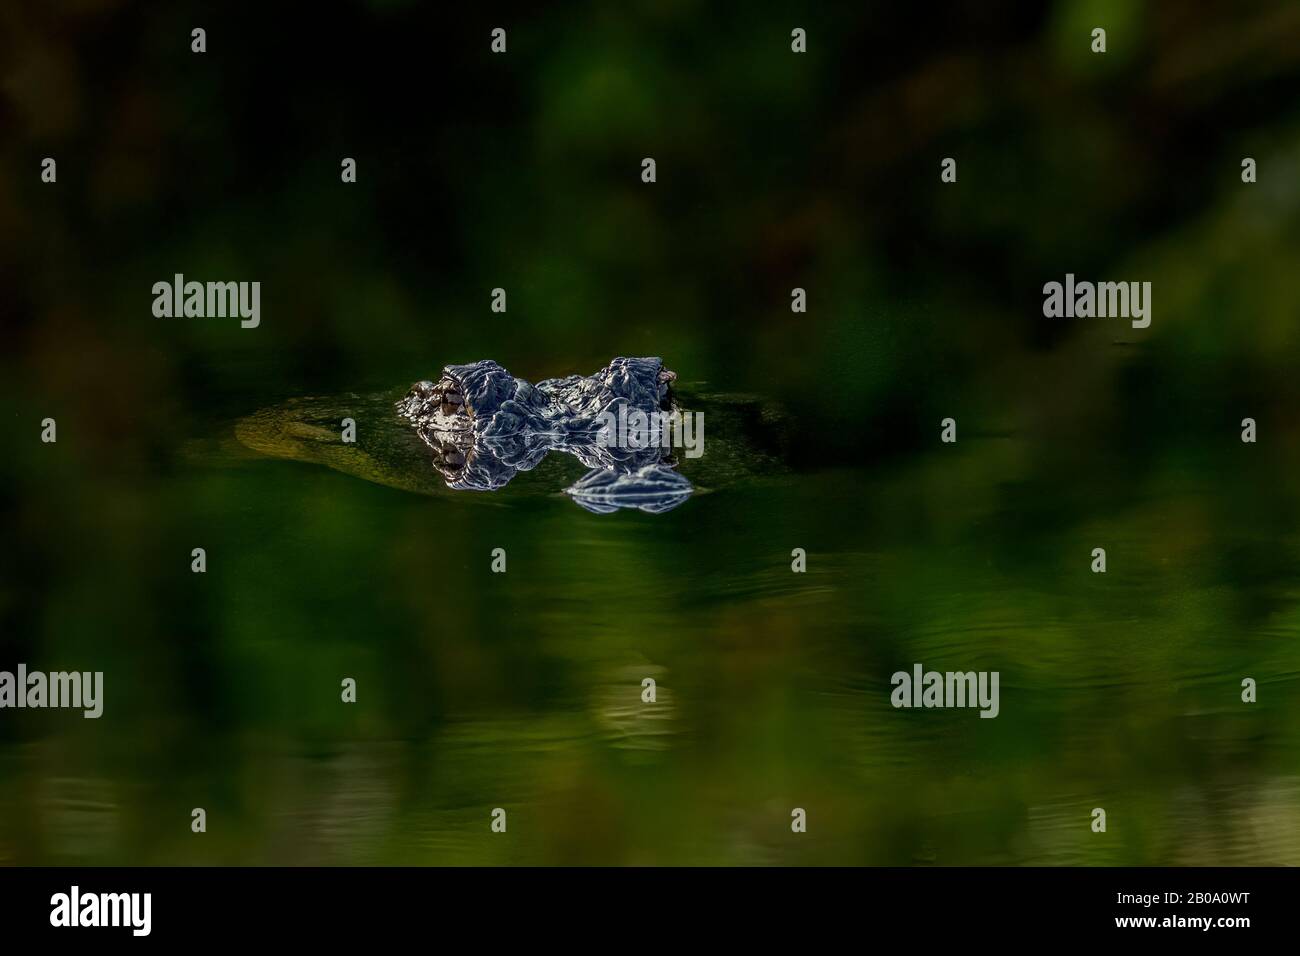 Abstract photo of an adult American alligator (Alligator mississippiensis) peering out of green water. Stock Photo